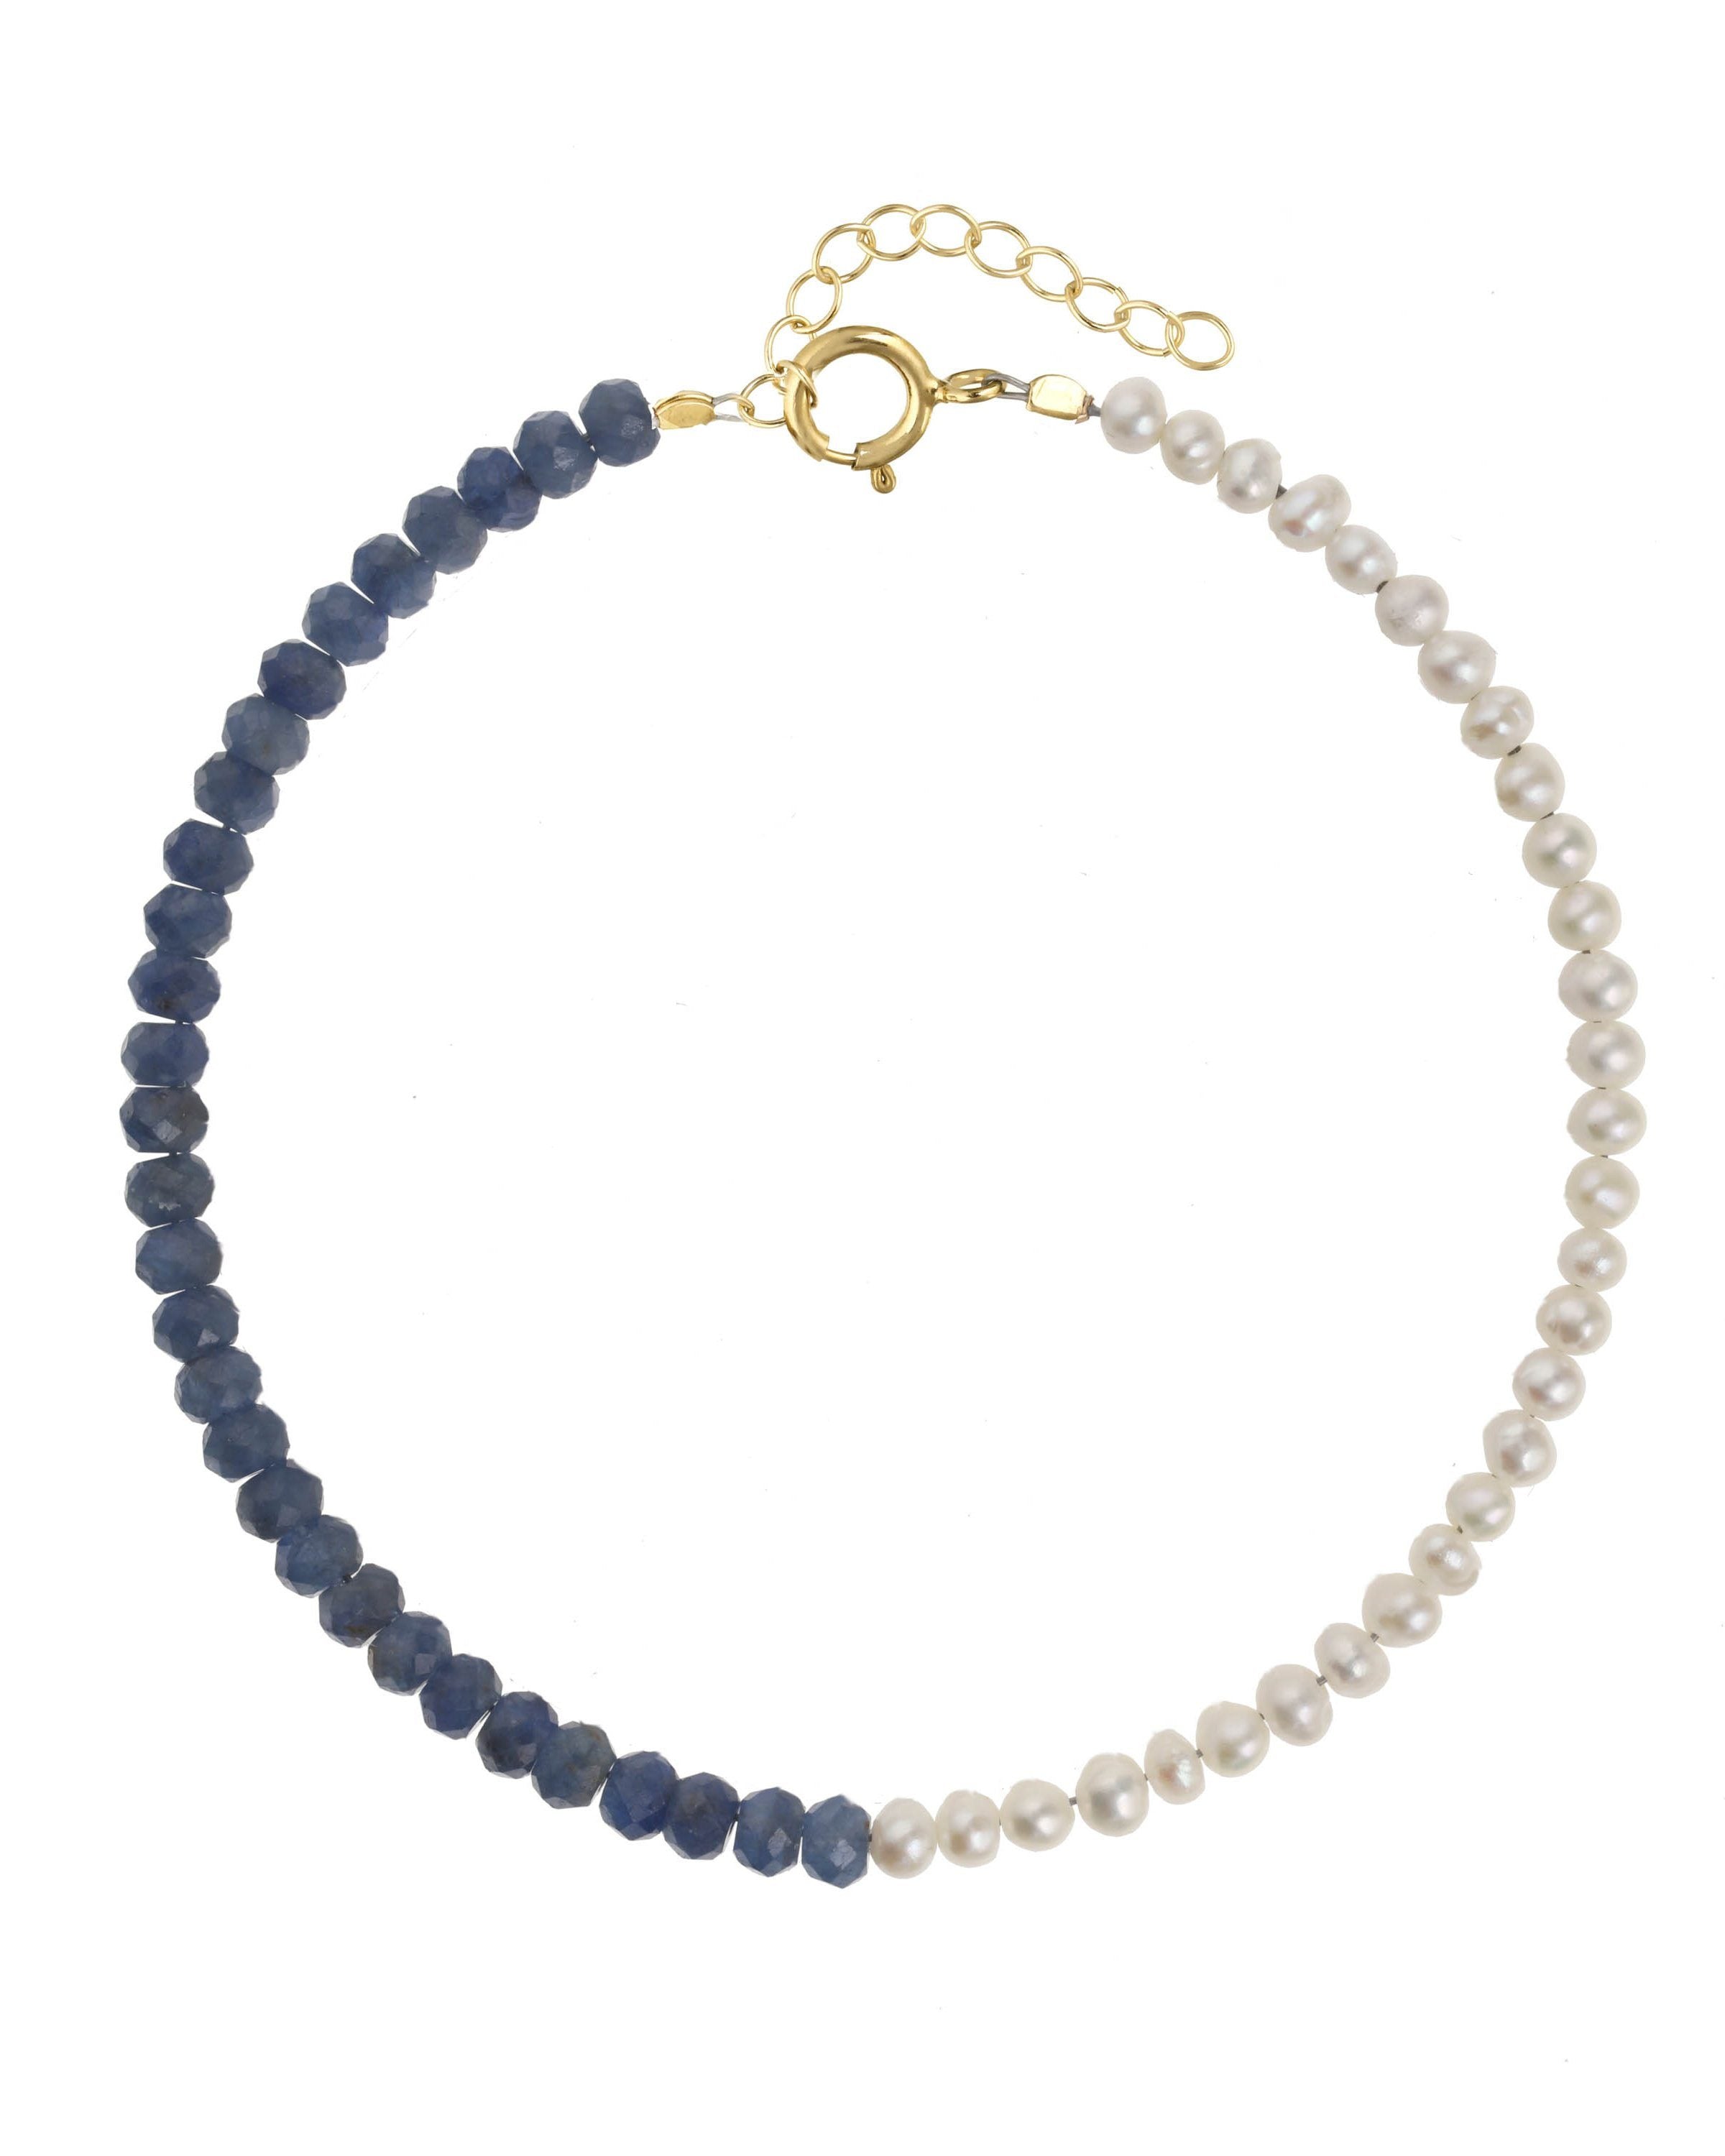 Elo Bracelet by KOZAKH. A 6 to 7 inch adjustable length bracelet, crafted in 14K Gold Filled. Half of the bracelet strand features 3.5mm Freshwater Pearls and 3.5mm Faceted Sapphire beads on the other half.